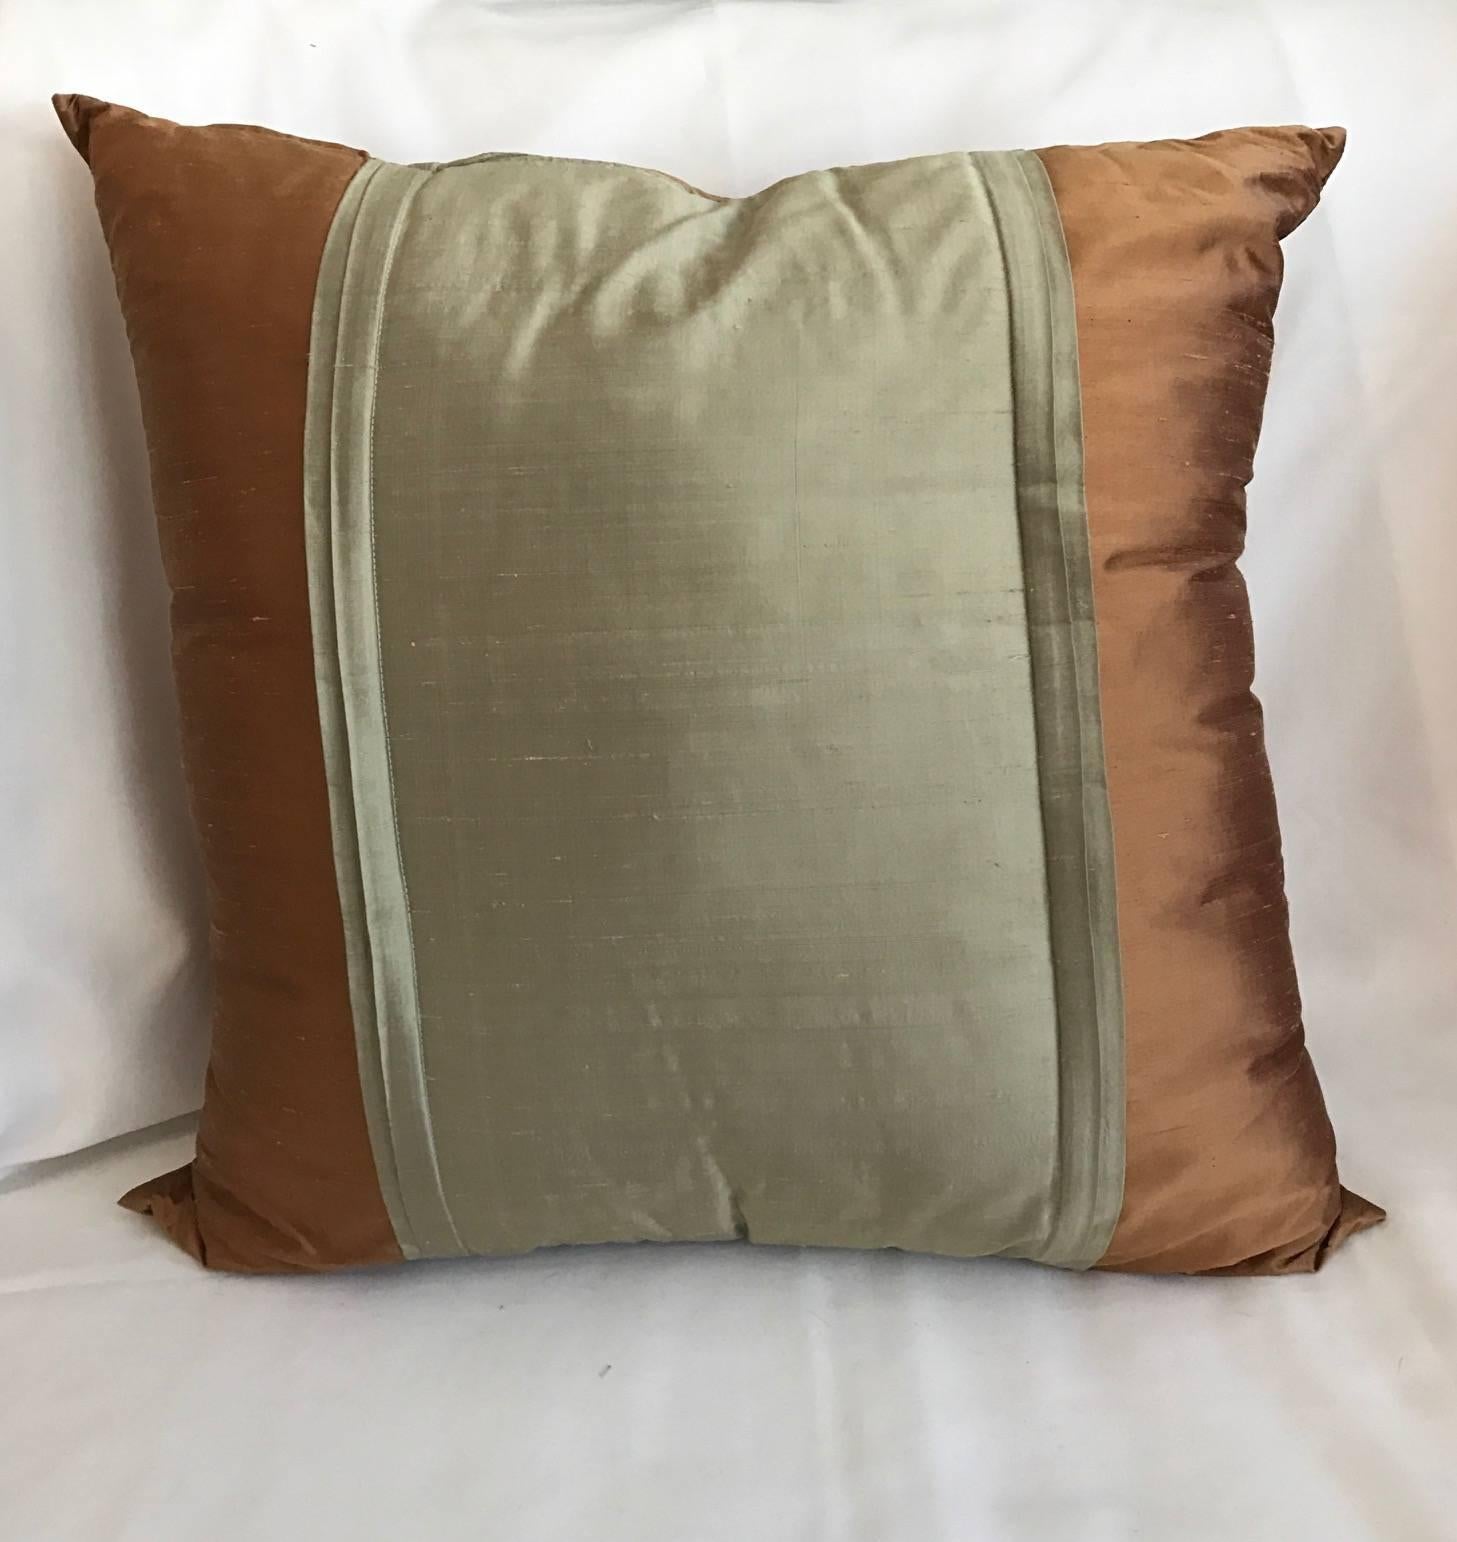 SALE Three Lee Jofa Silk Pillows Sandstone Brown, Graphite and Indian River Taup For Sale 2